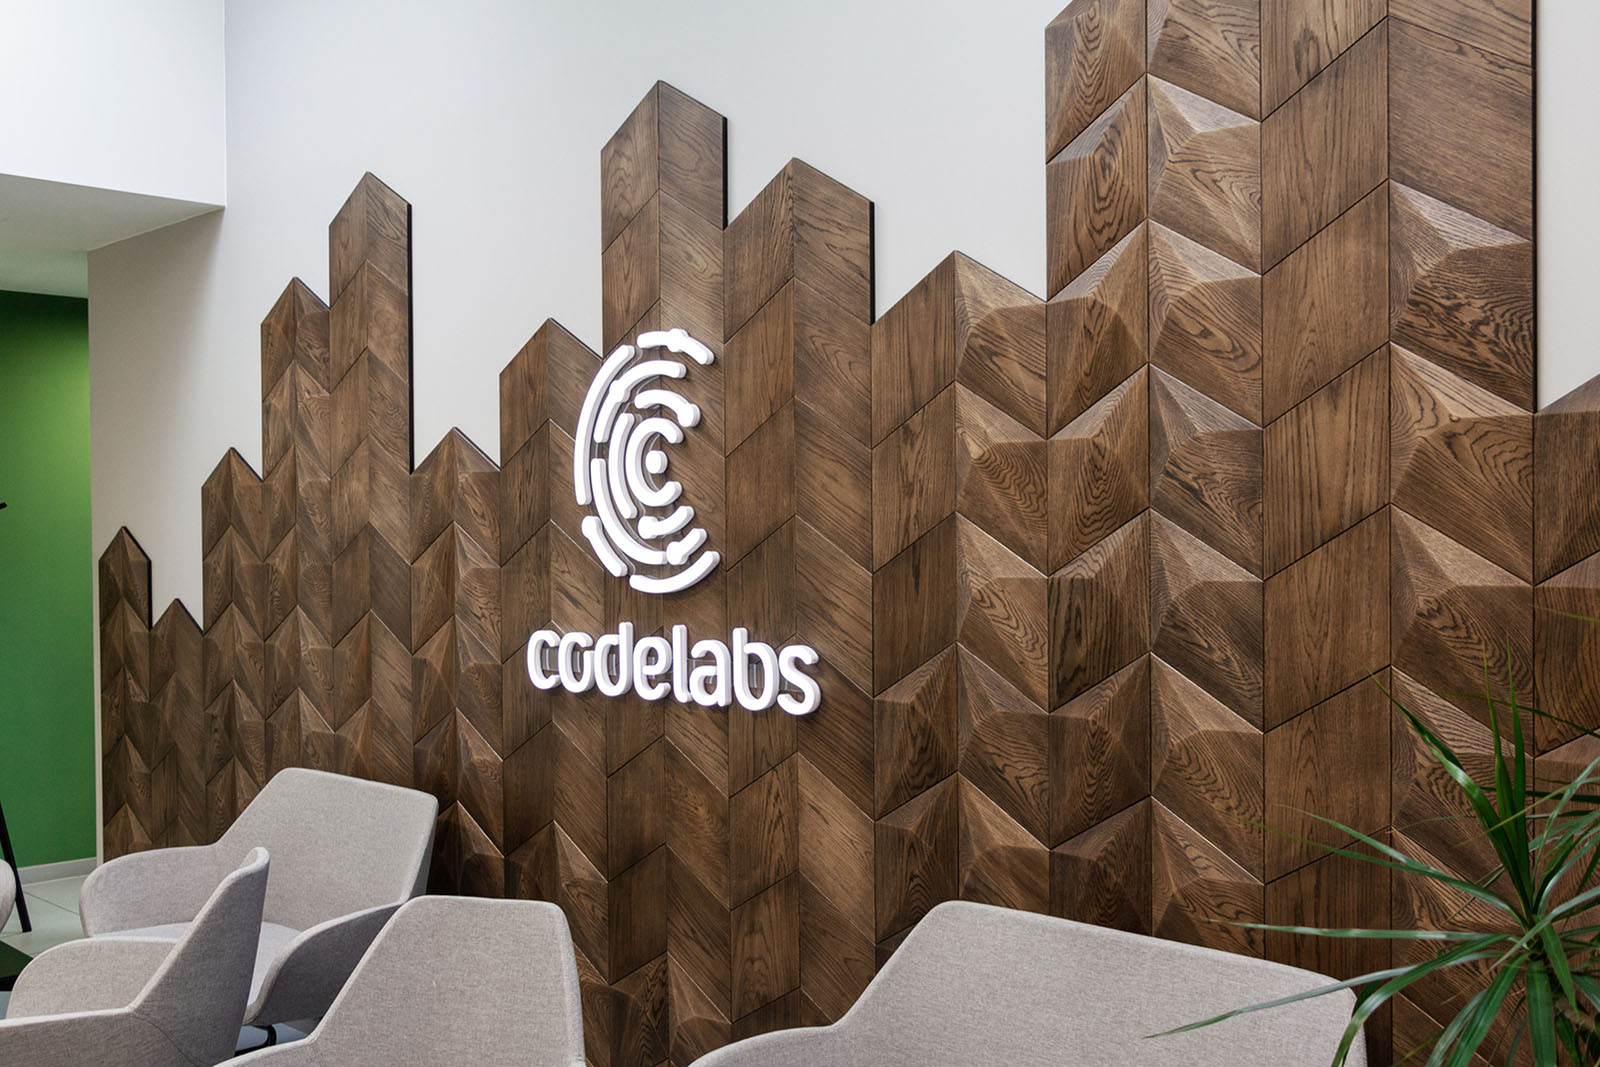 View of decorative wooden panels in the modern office